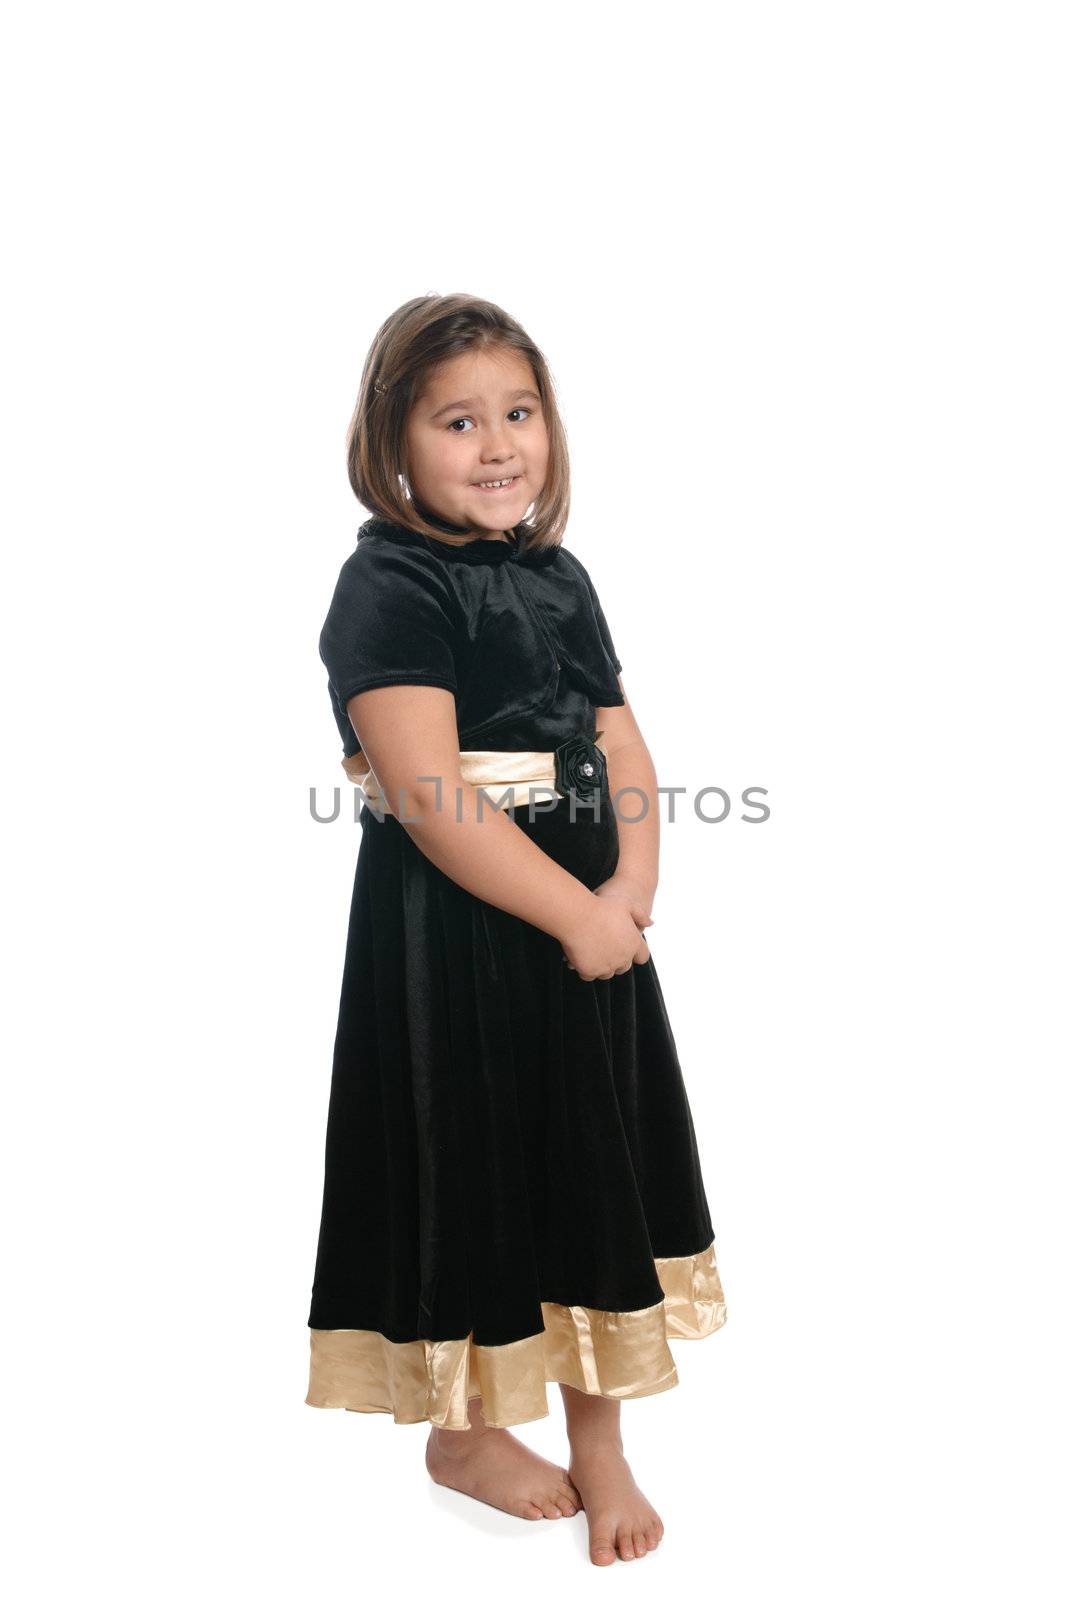 A young kindergarten student wearing a black dress is isolated on a white background.